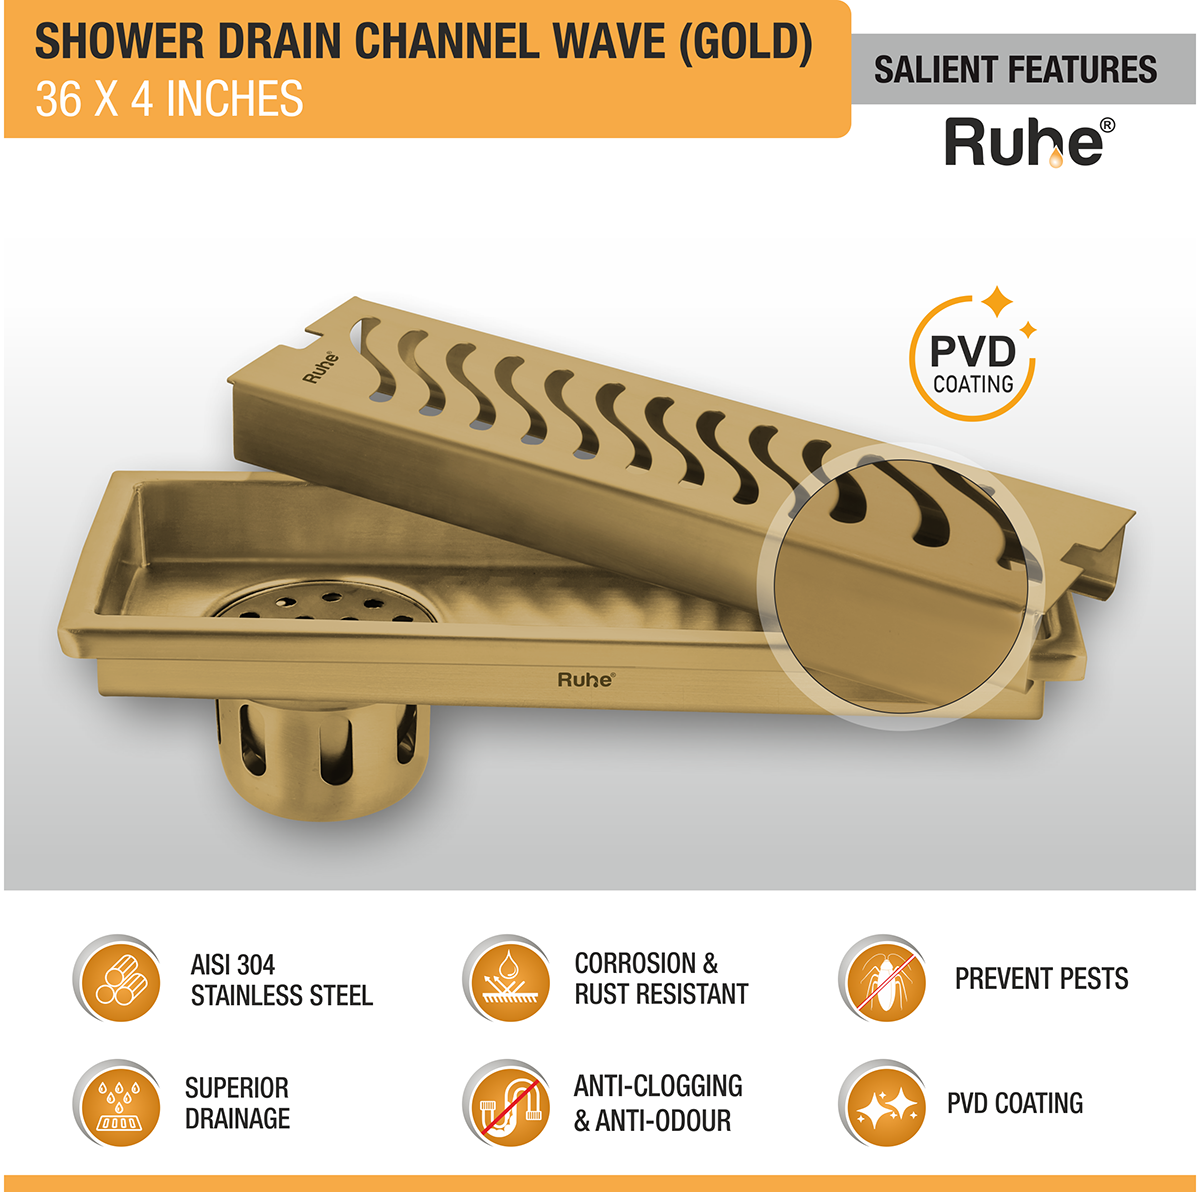 Wave Shower Drain Channel (36 x 4 Inches) YELLOW GOLD features